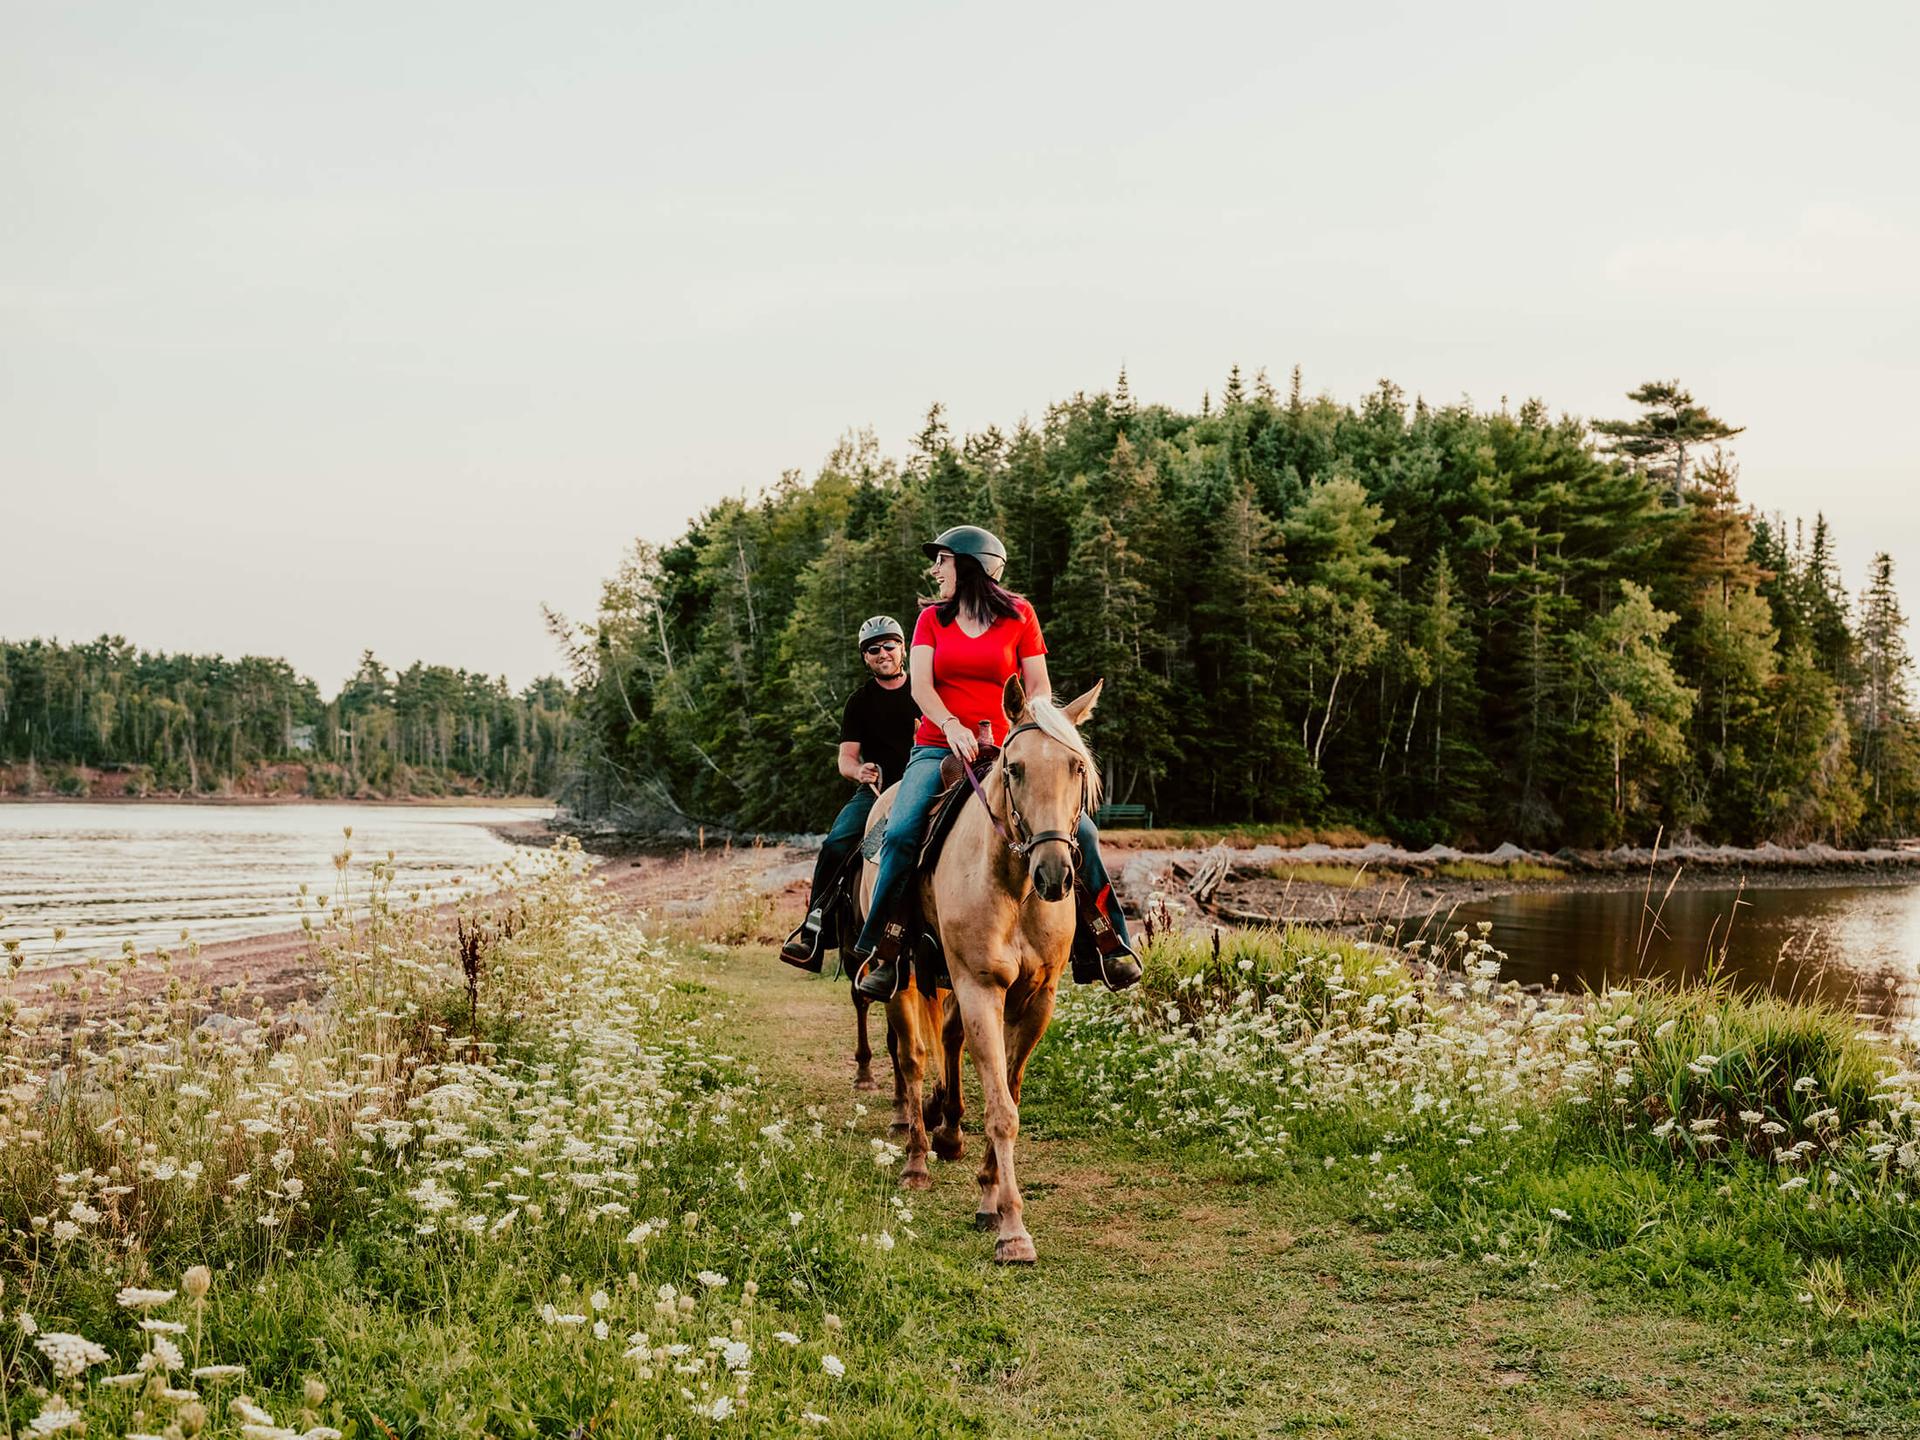 Two people ride horses on a dirt road